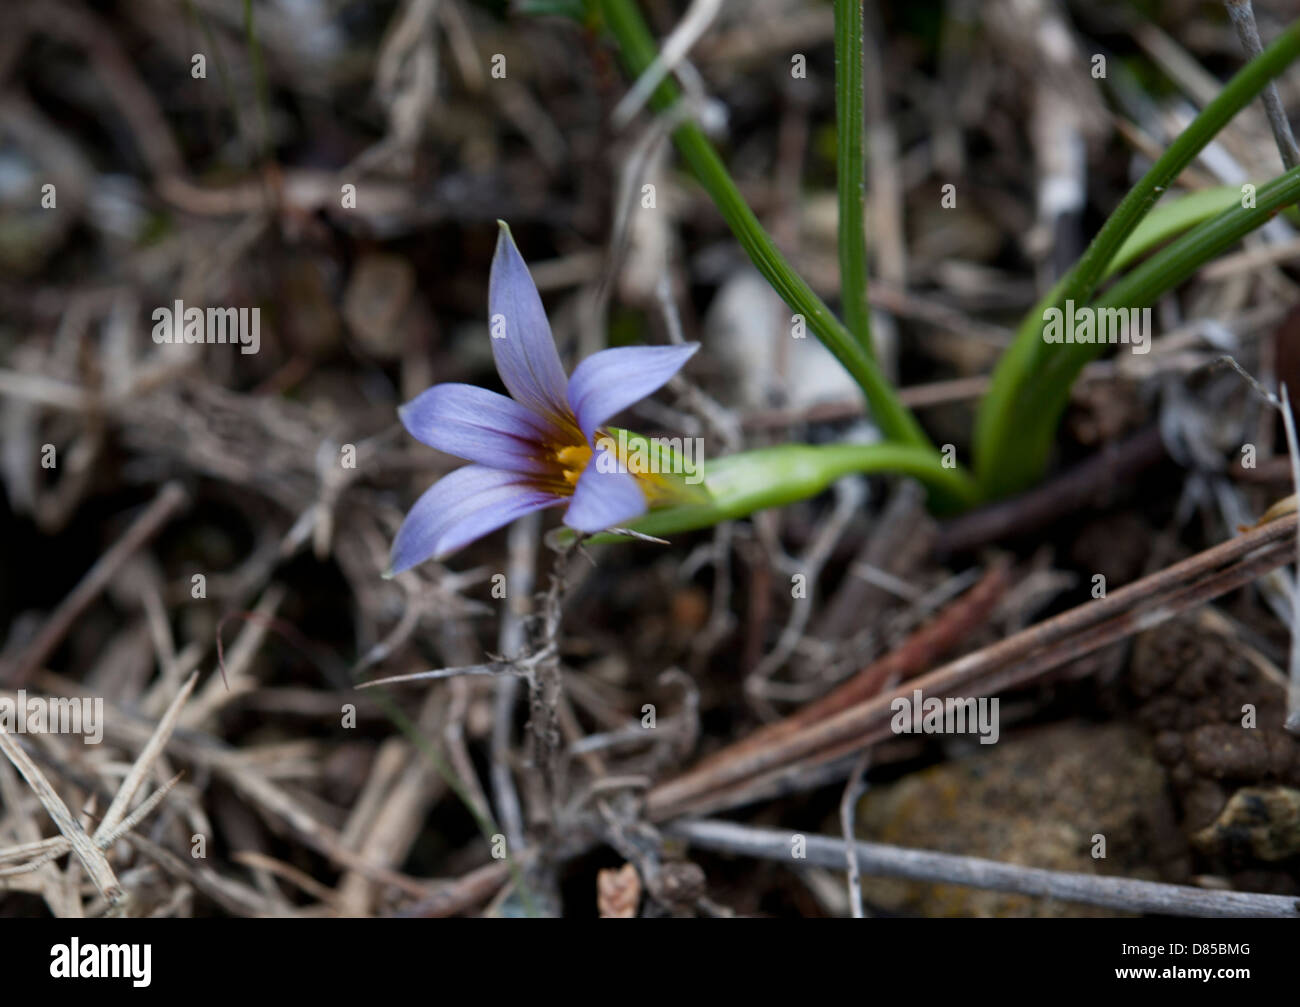 Romulea bulbicodium var clusiana, growing in garrigue on the sierras of Andalucia, Spain. February. Stock Photo